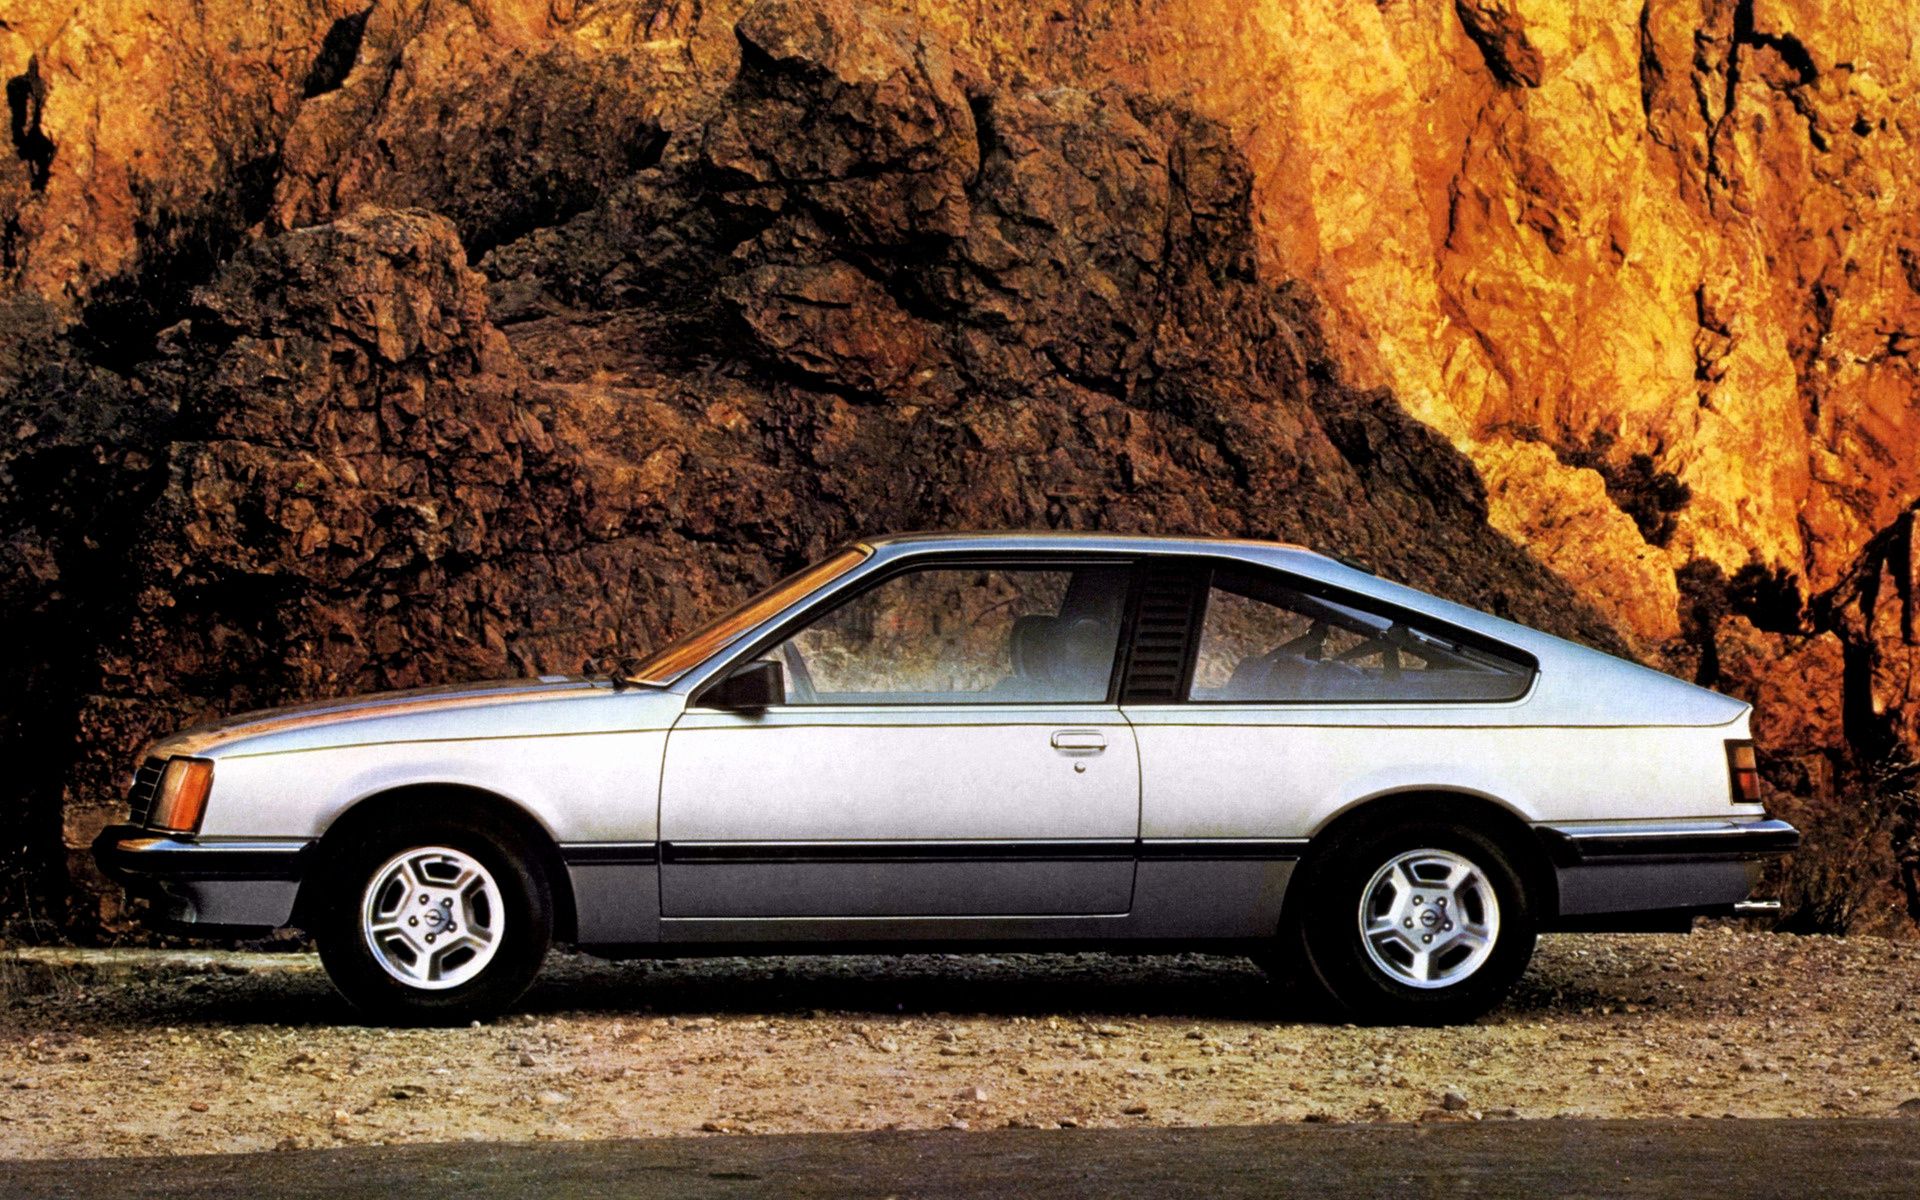 Opel Monza Wallpaper HD Photo, Wallpaper and other Image